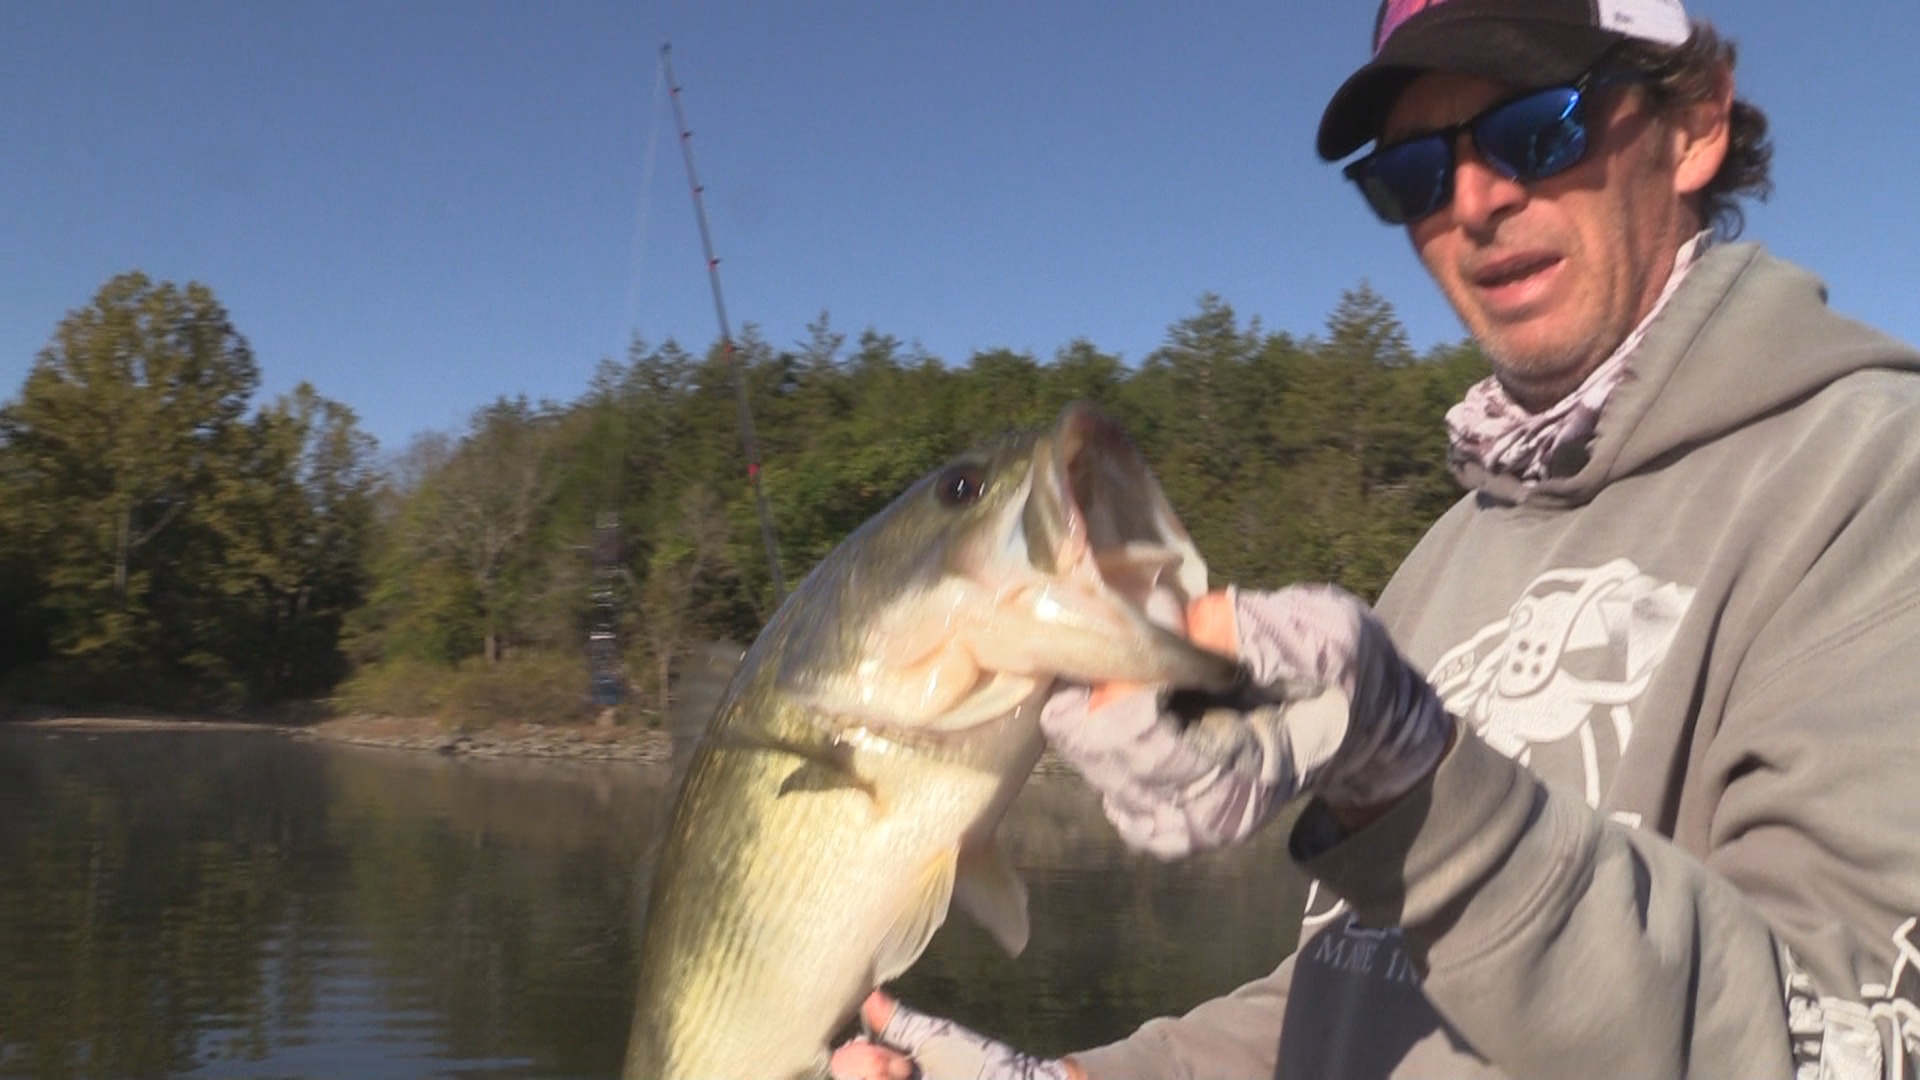 Table Rock Fishing Intel  Premiere Bass and Crappie Fishing Videos, Tips,  Tournament Info and Content for Table Rock Lake